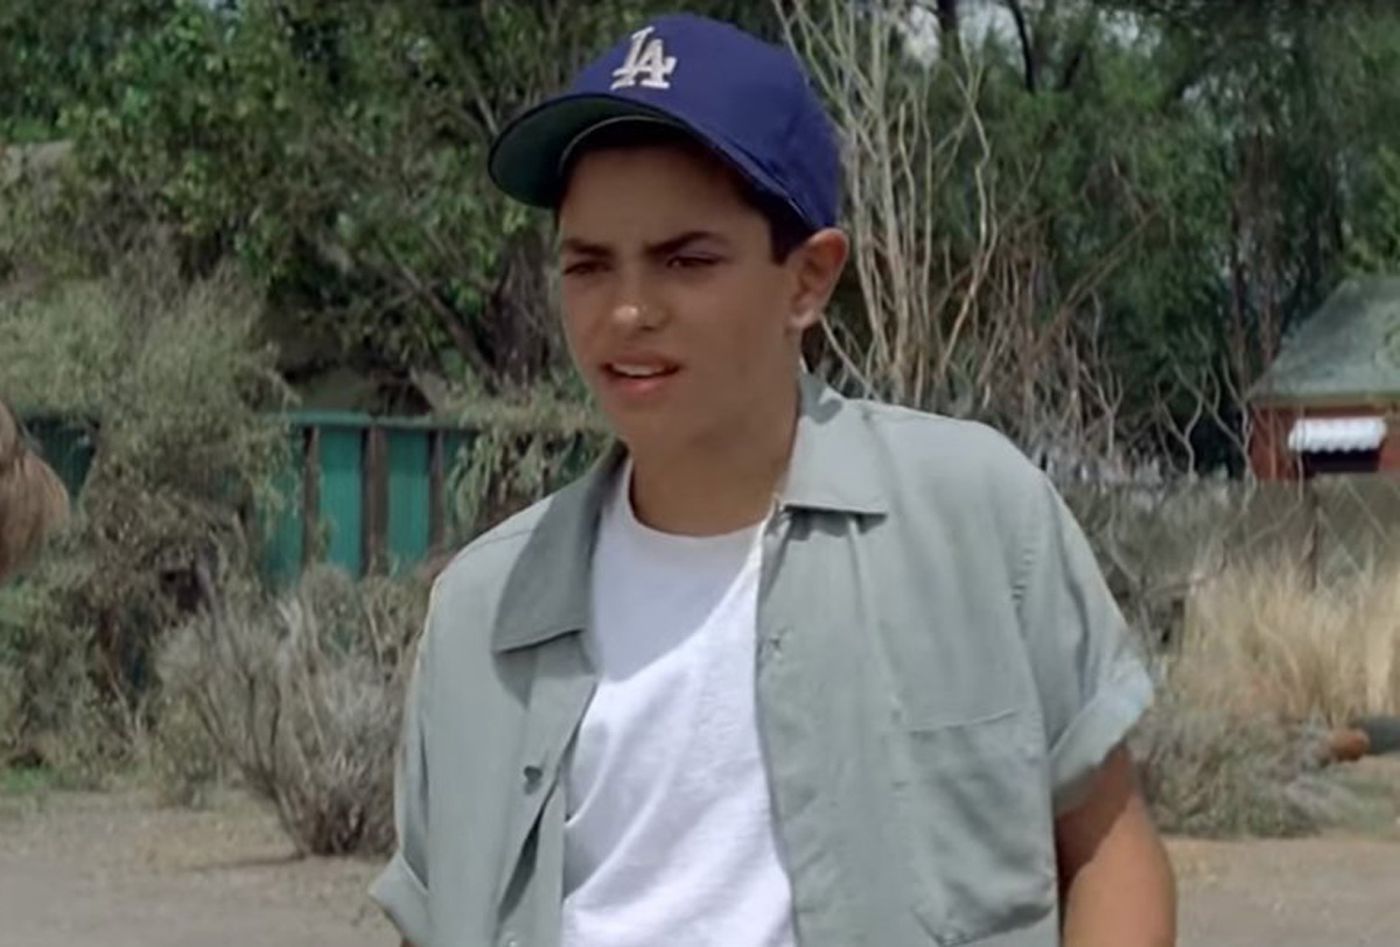 Sandlot' star Mike Vitar hit with new lawsuit from 2015 beating